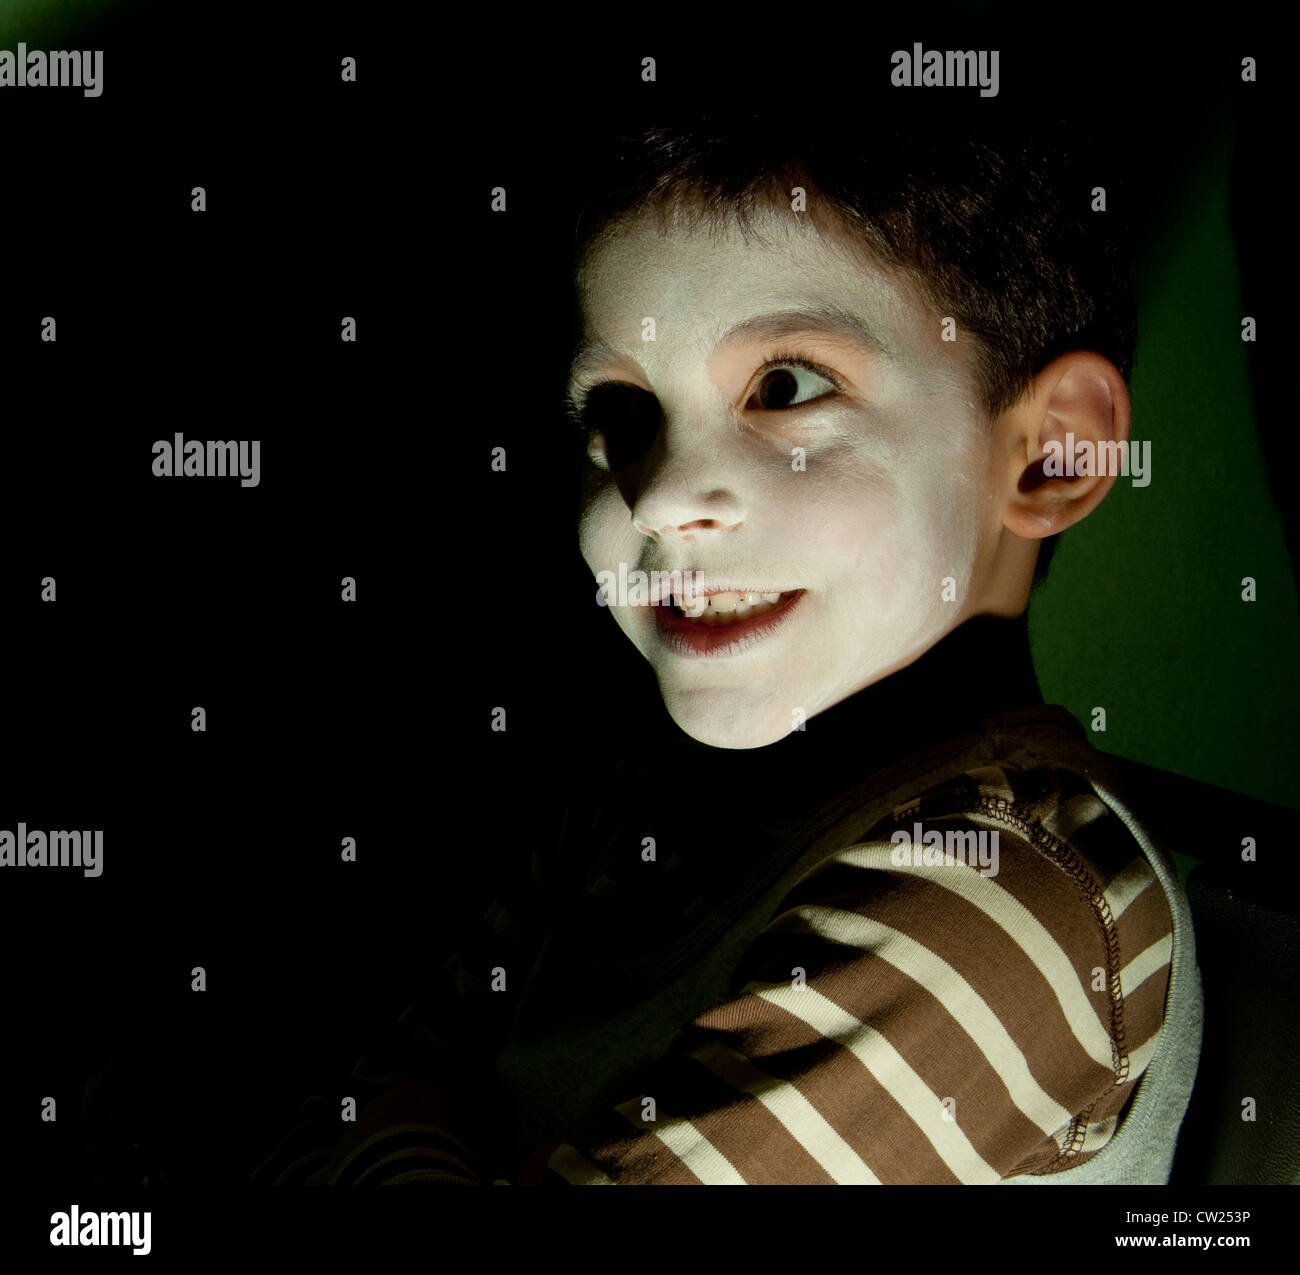 Under lit small boy in white face looking ghoulish Stock Photo